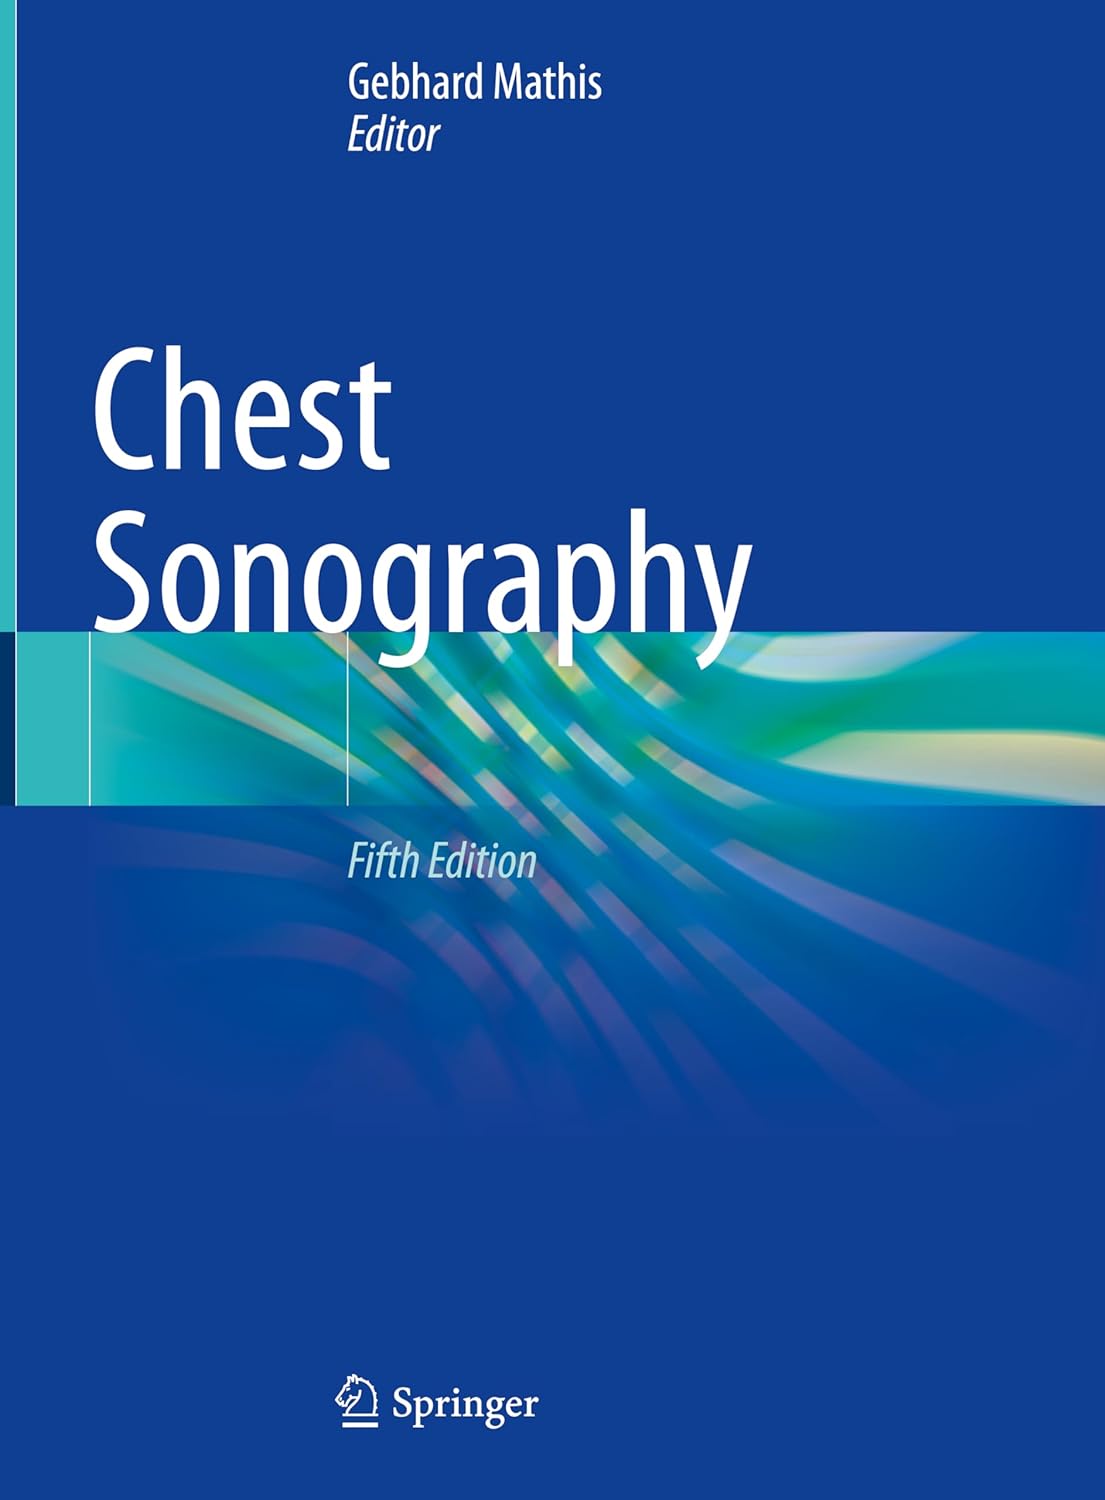 (EBook PDF)Chest Sonography 5th ed by Gebhard Mathis